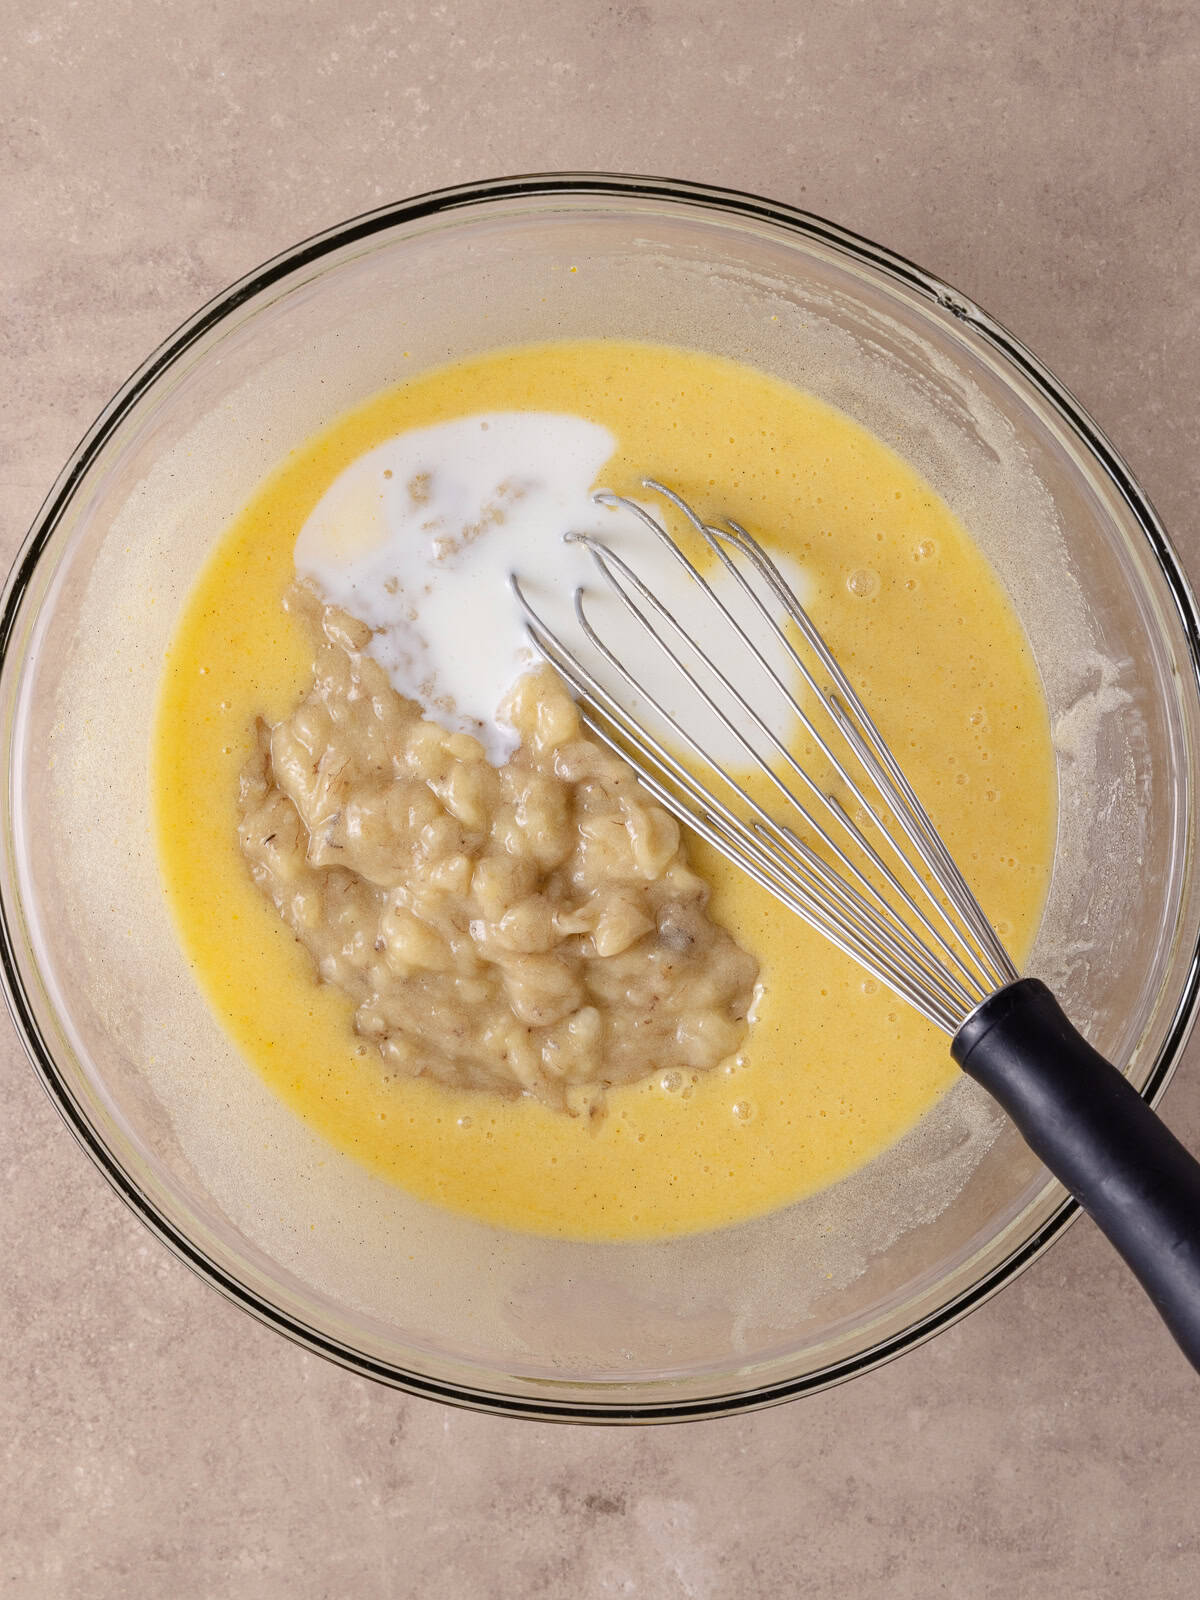 Mashed bananas and buttermilk is added to the mixture.